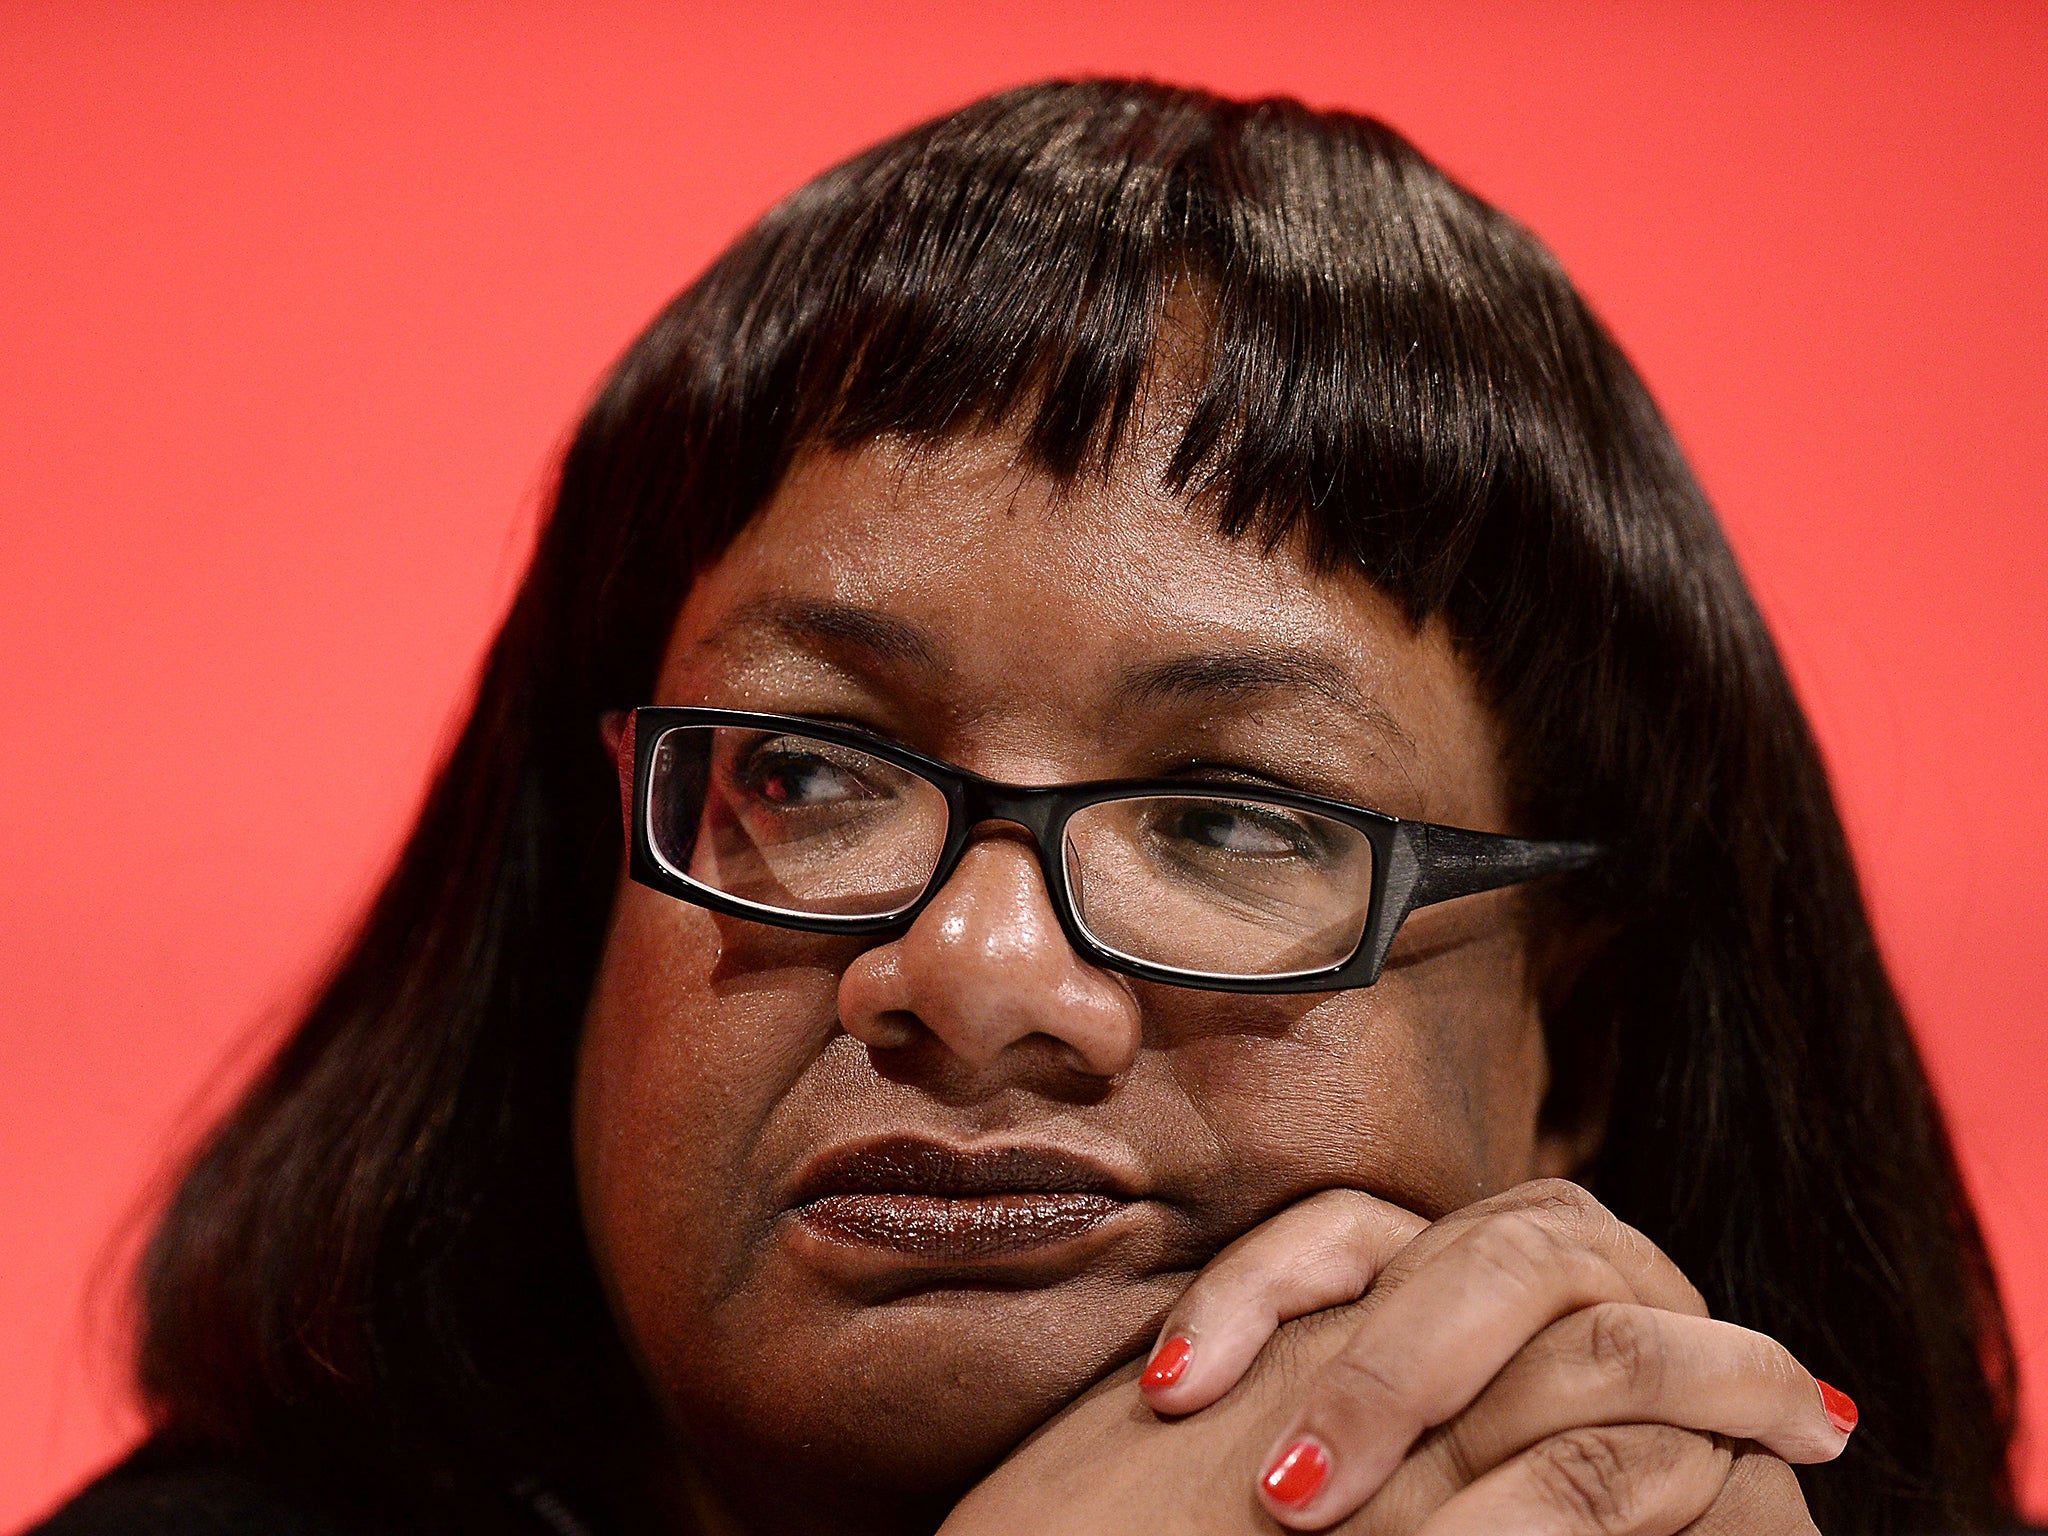 Diane Abbott said Brexit would be "disastrous" - moments after voting for it